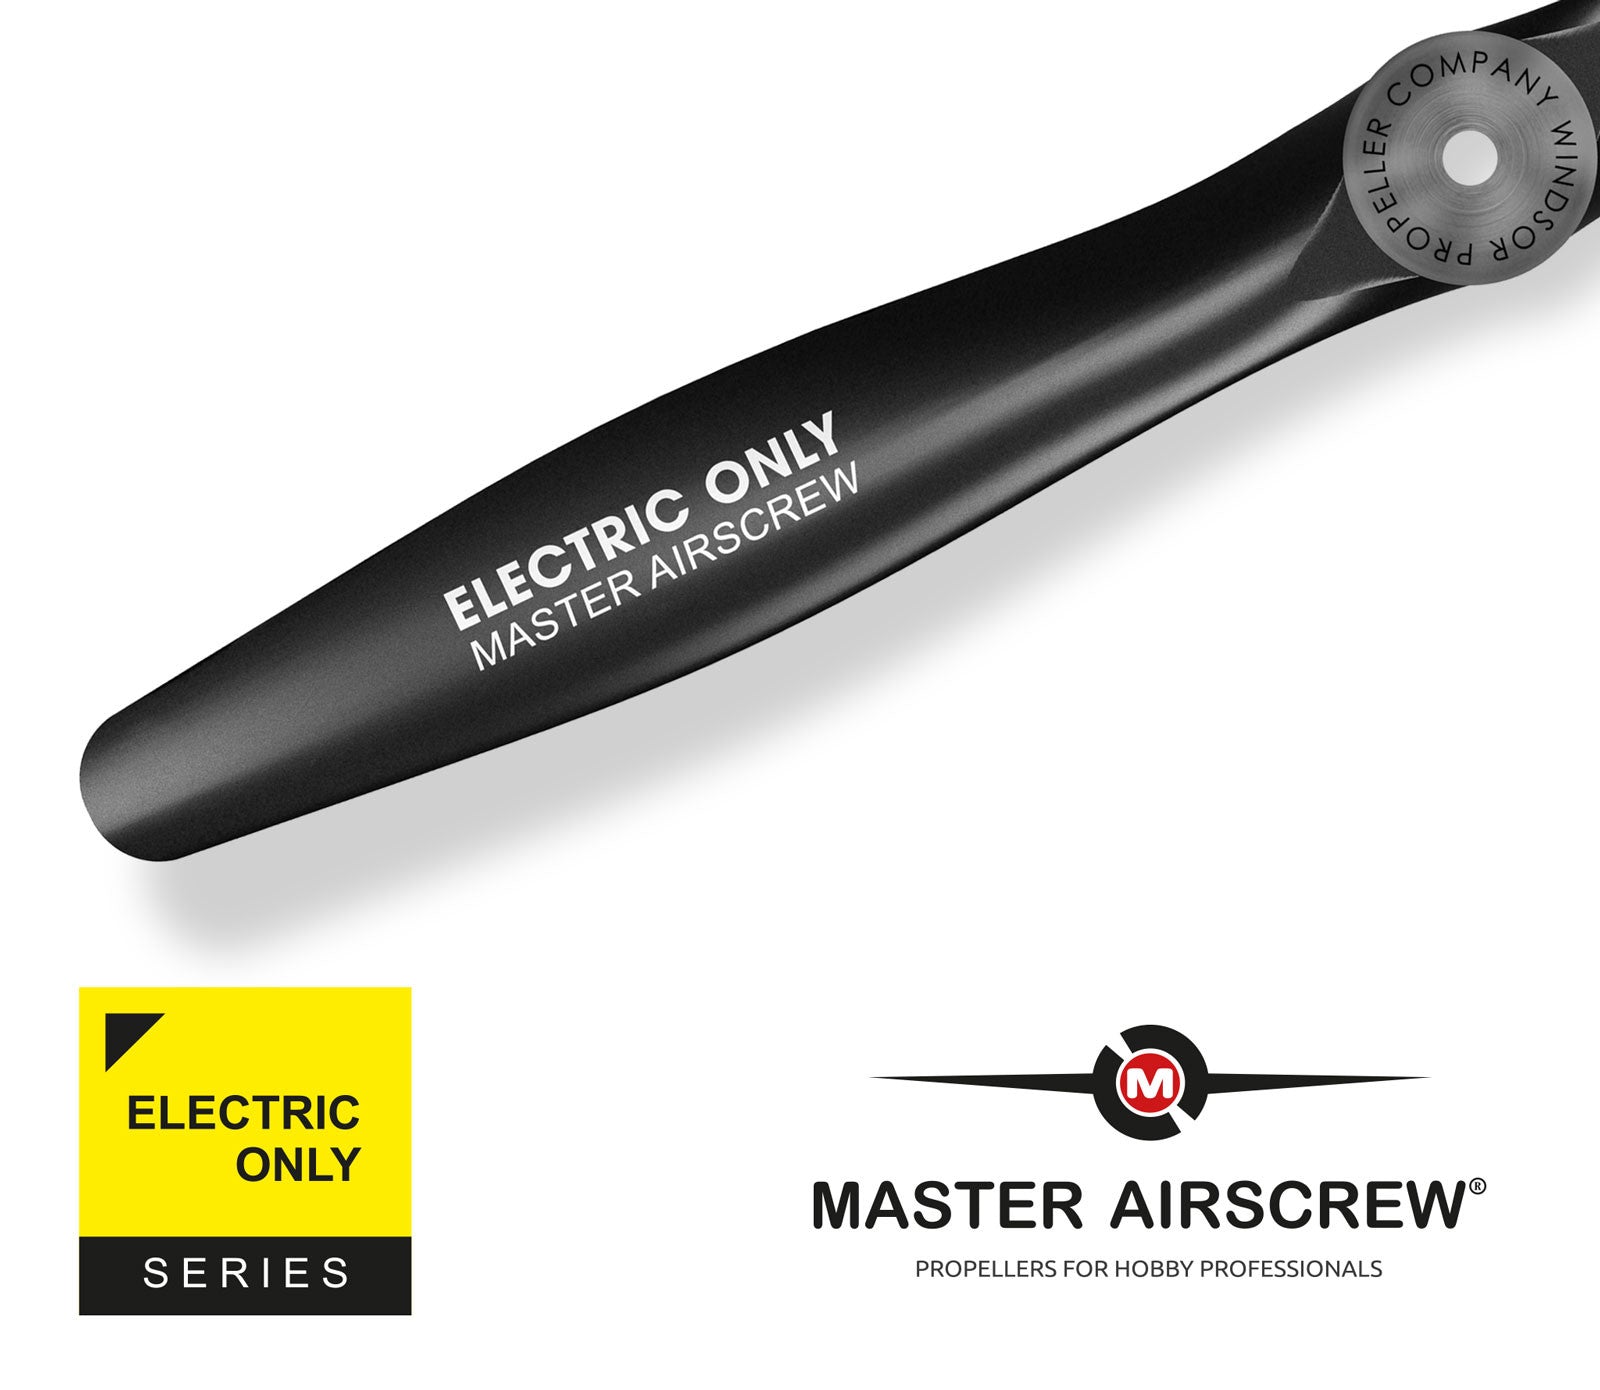 Electric Only - 13x8.5 Propeller - Master Airscrew